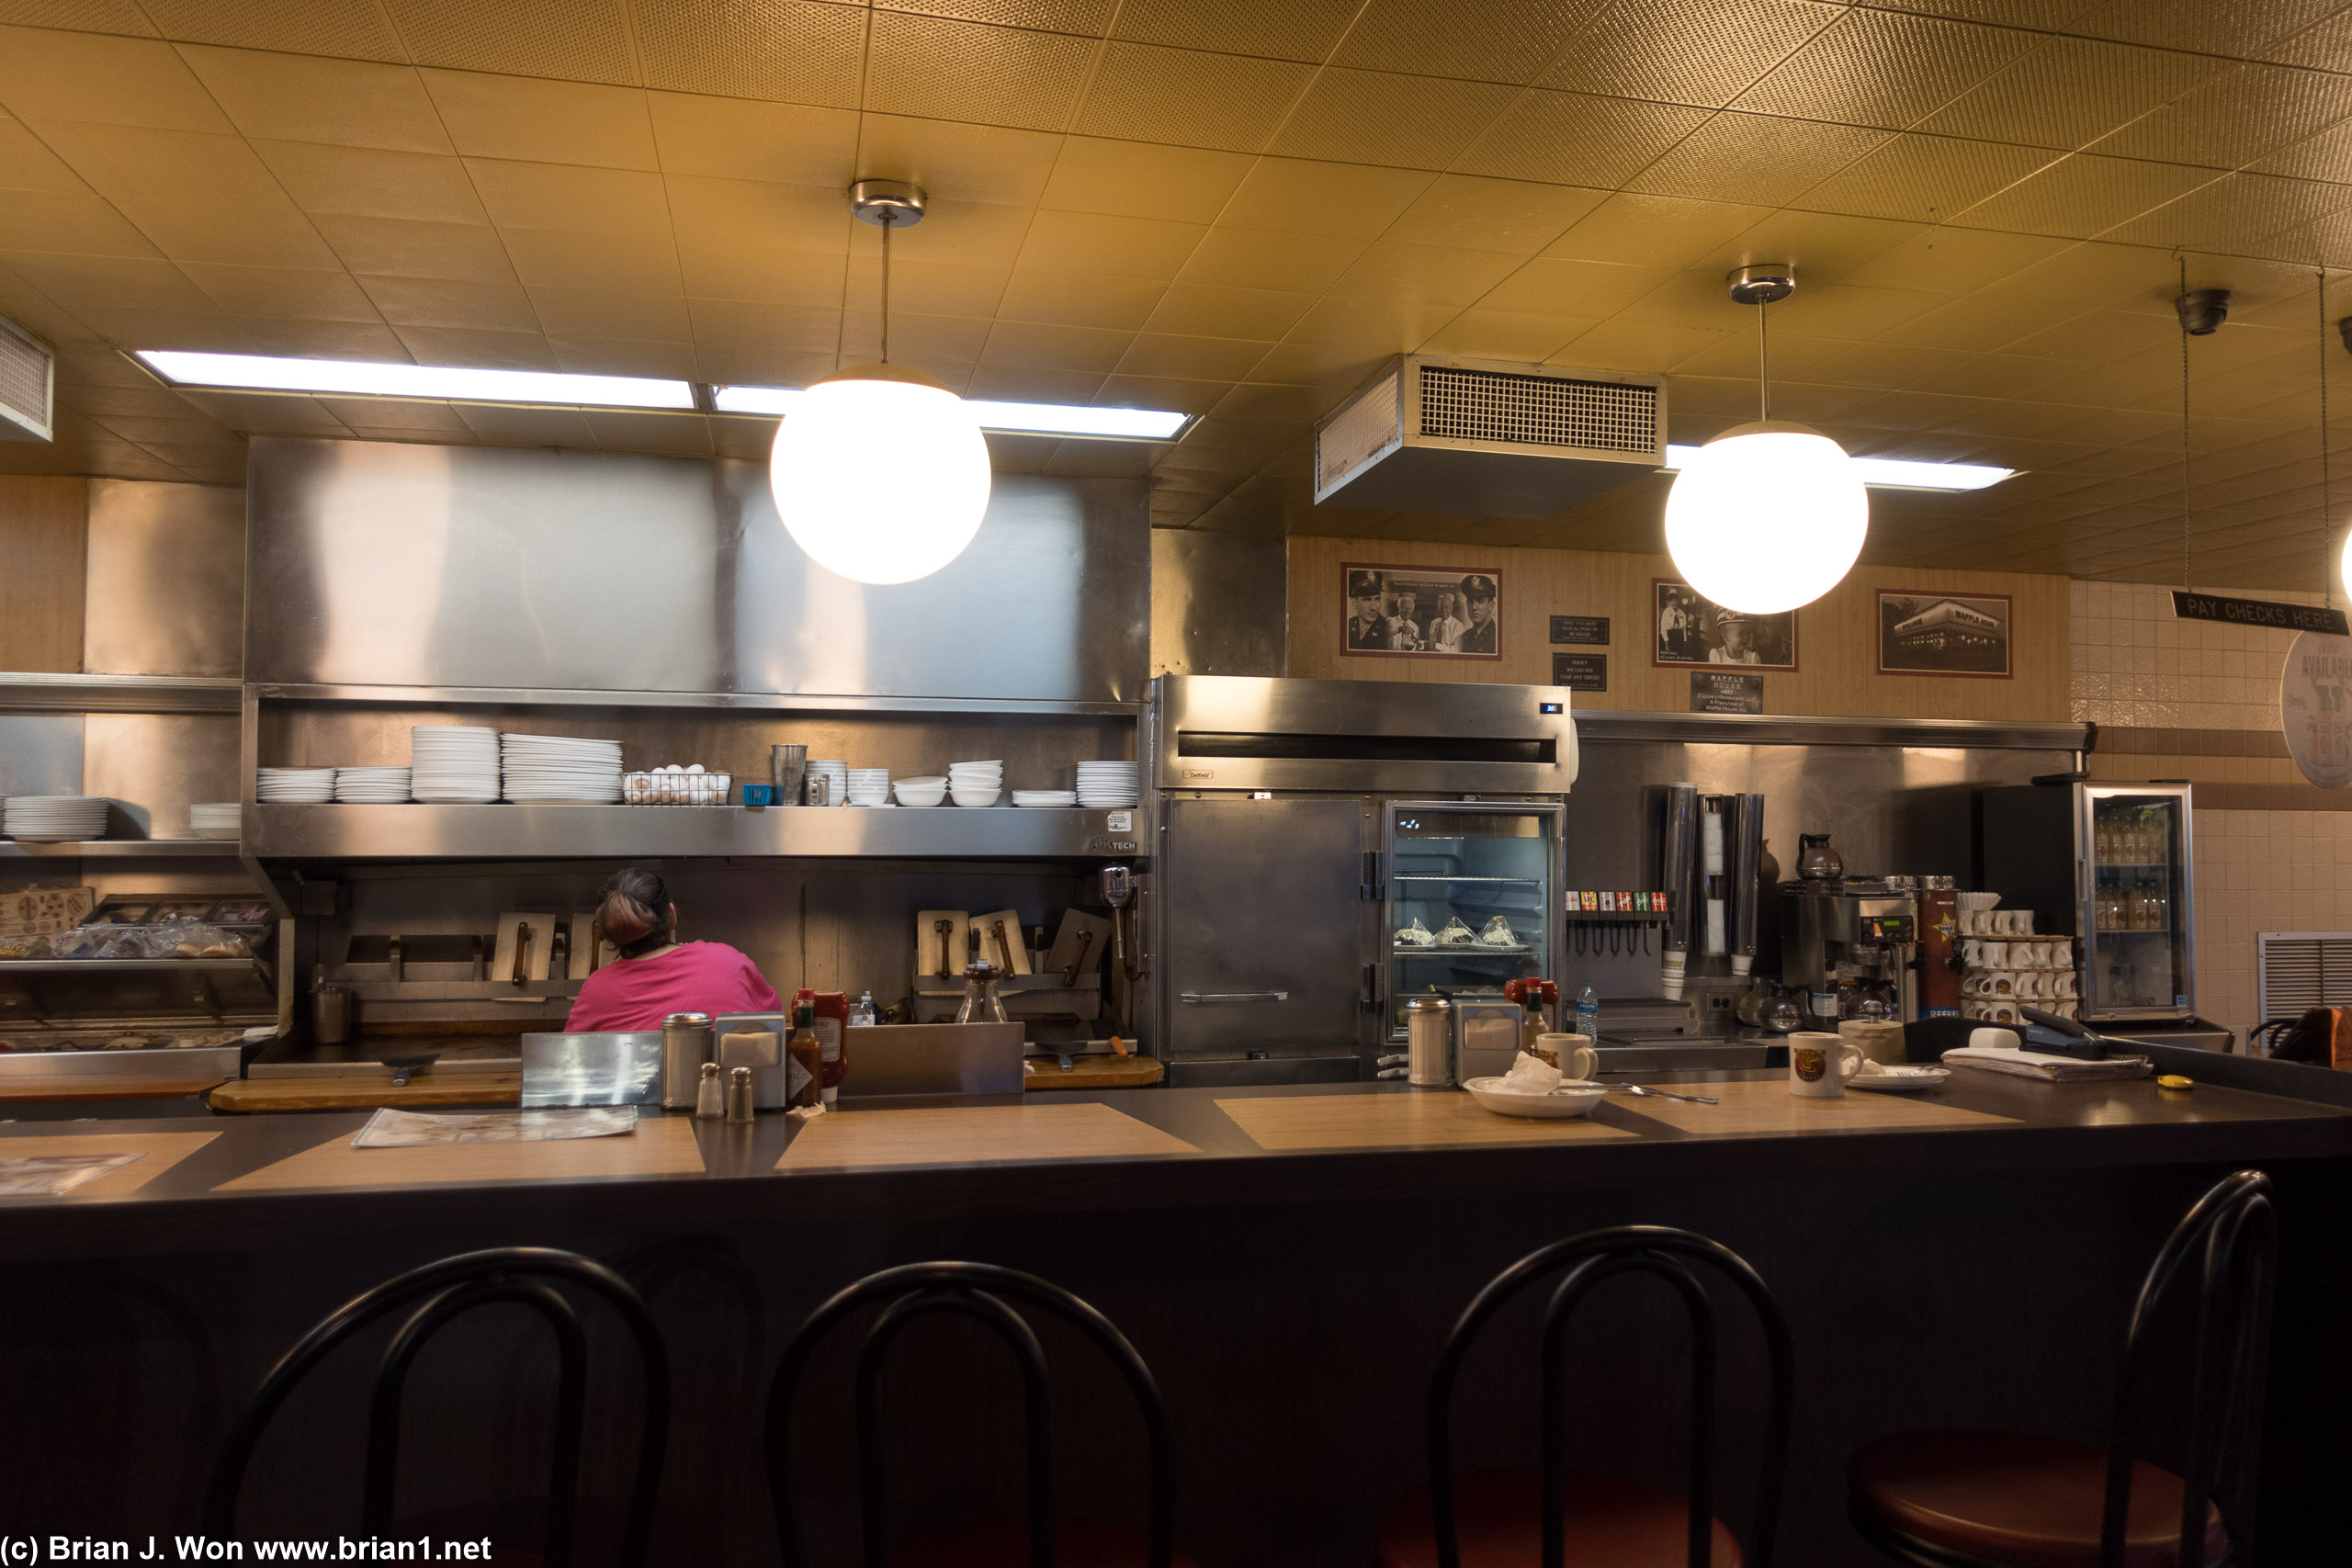 Inside is stereotypical Waffle House.